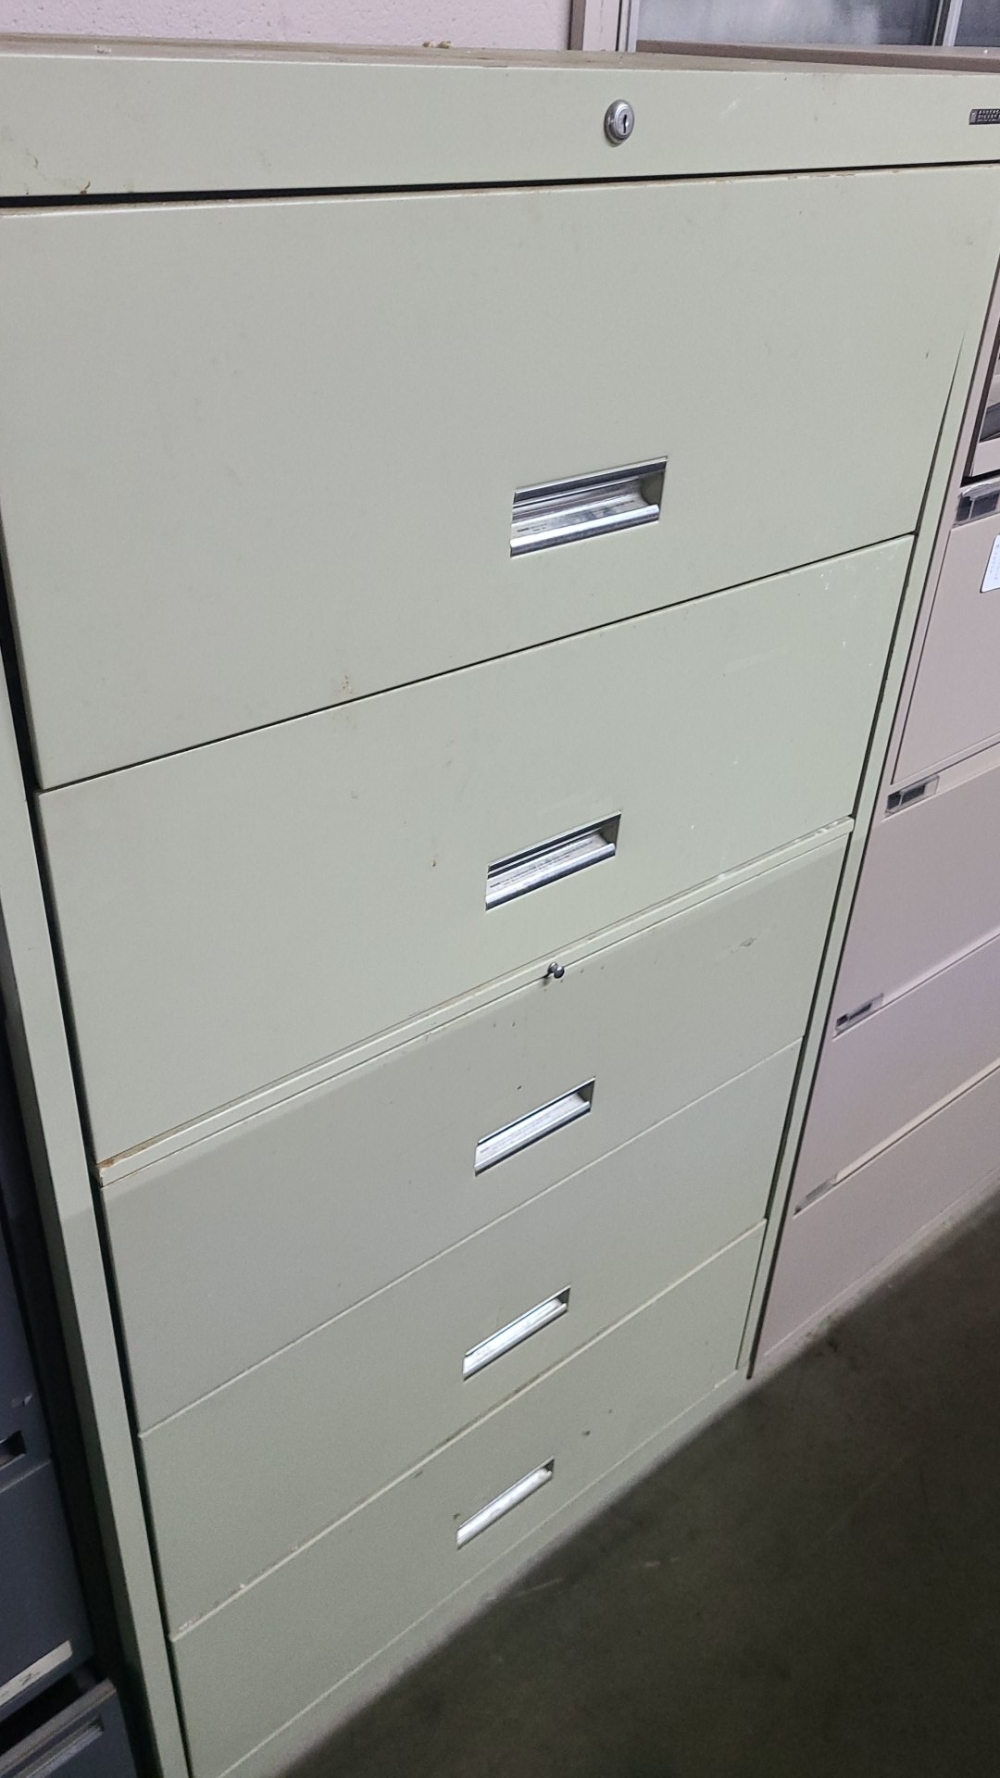  5 DRAWER LATERAL